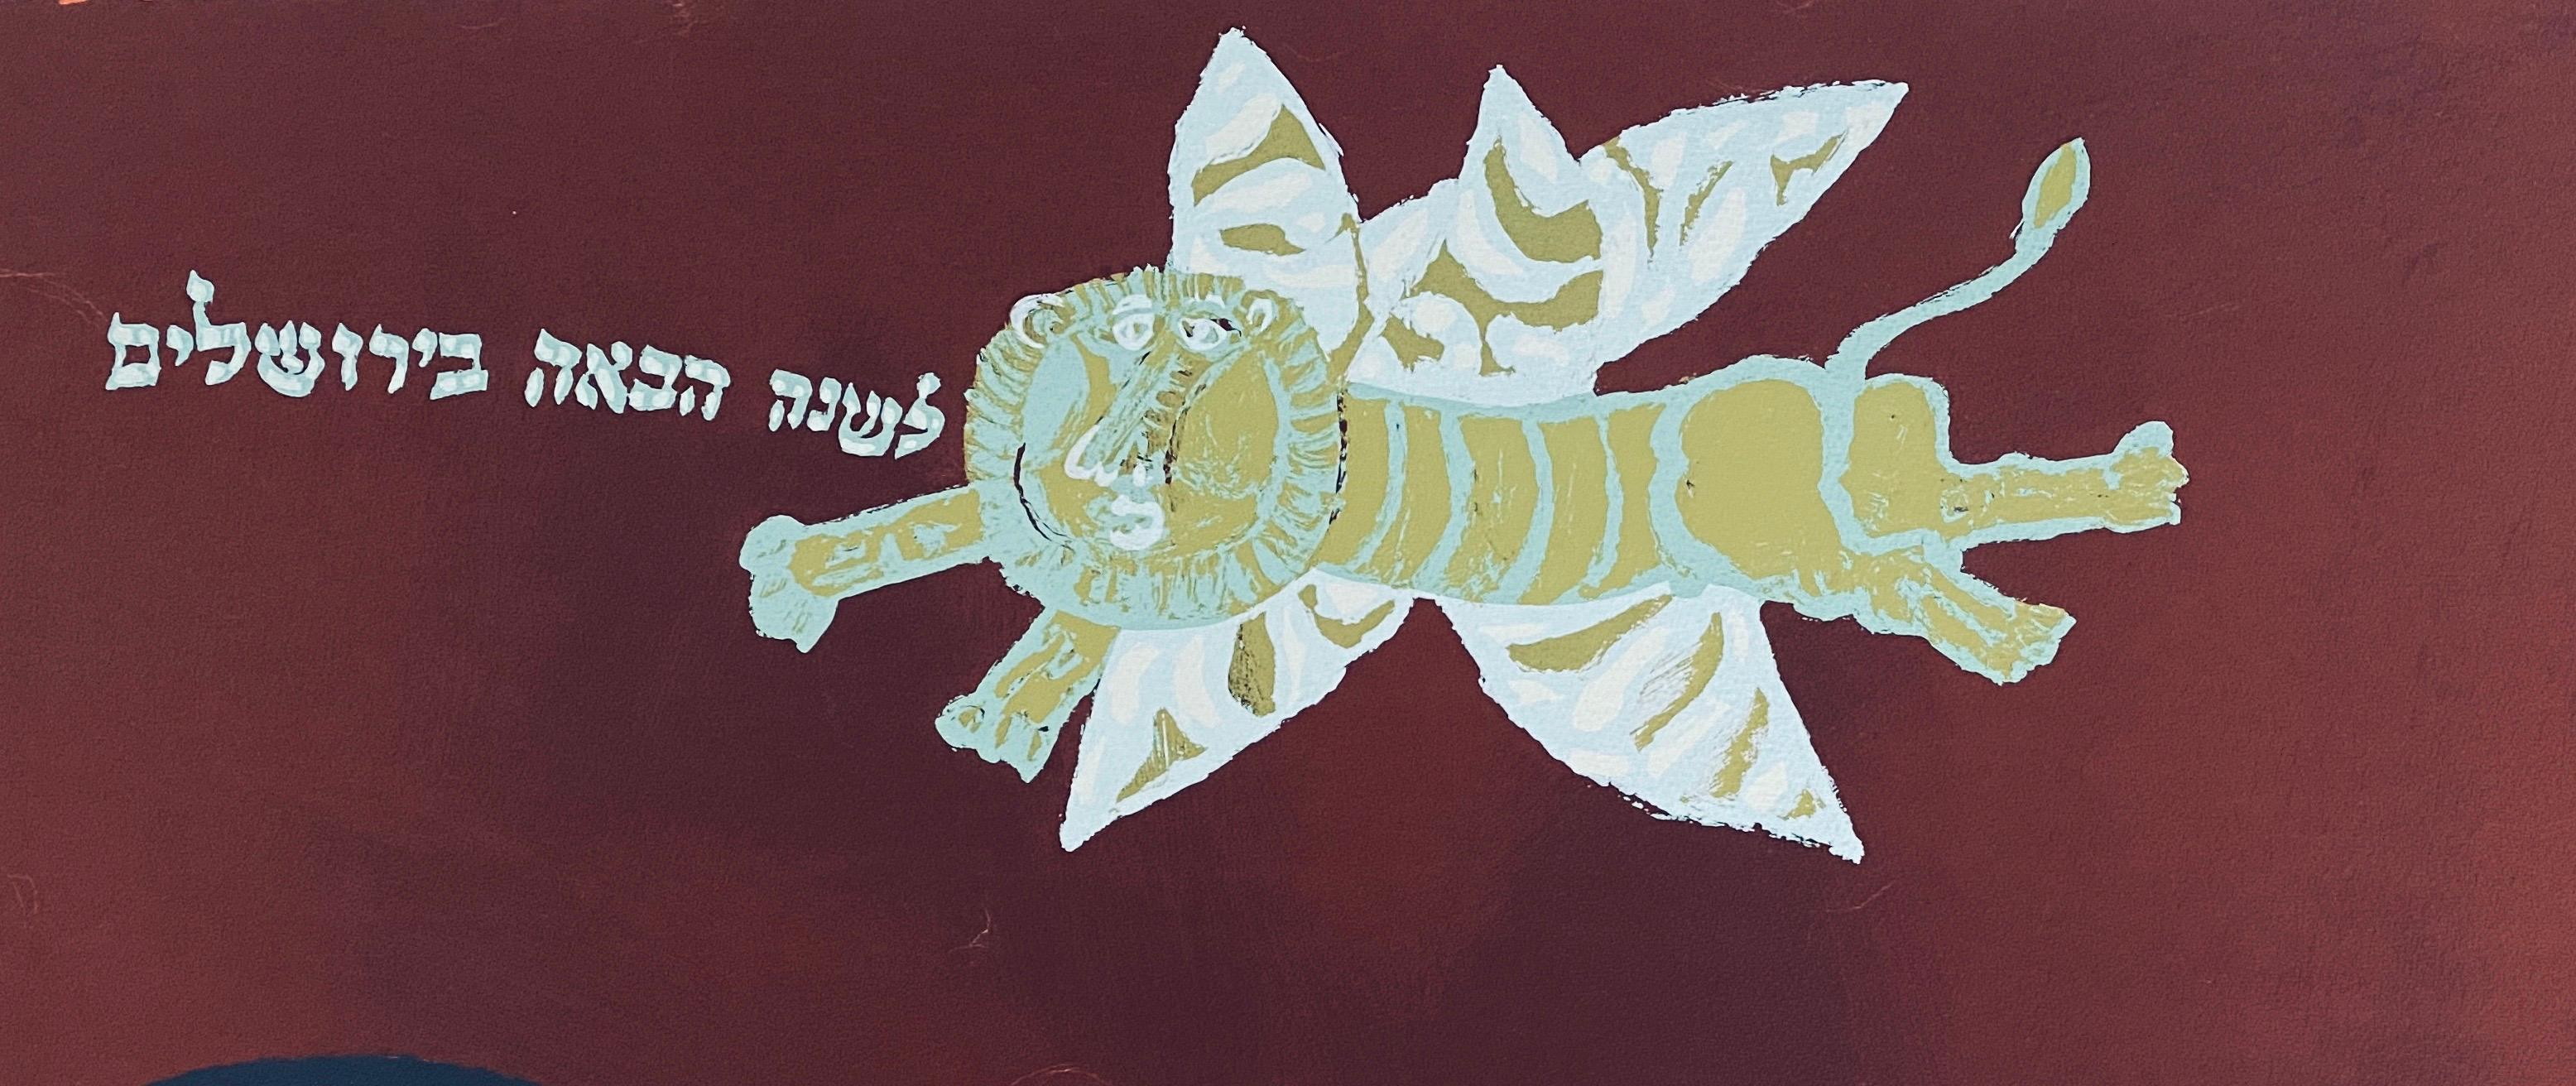 Naftali Bezem (Hebrew: נפתלי בזם‎‎; born November 27, 1924) is an Israeli painter, muralist, and sculptor.

Bezem was born in Essen, Germany, in 1924. His early adolescence was spent under Nazi oppression, in constant fear for the safety of his